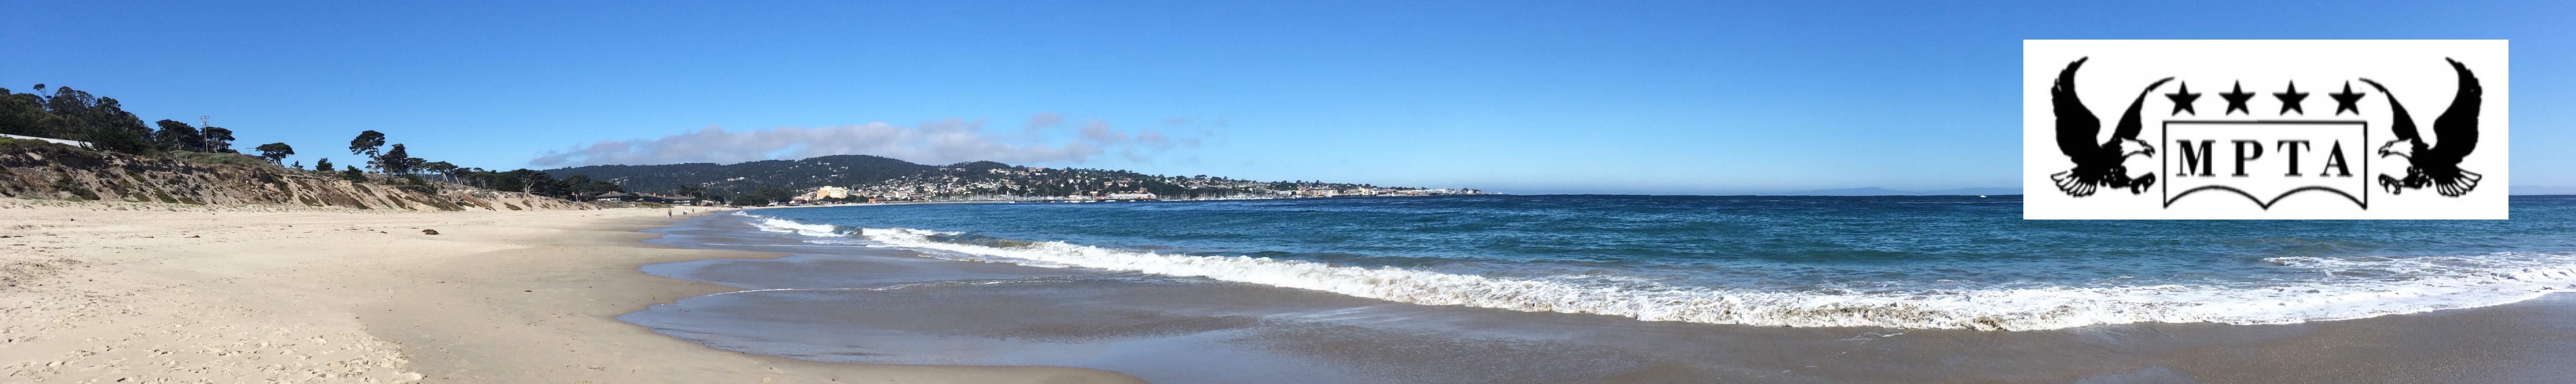 Monterey Peninsula Taxpayers Association Newsletter May 2018: Voting Guide, Water District Lawsuit, Choosing Your Electricity Supplier